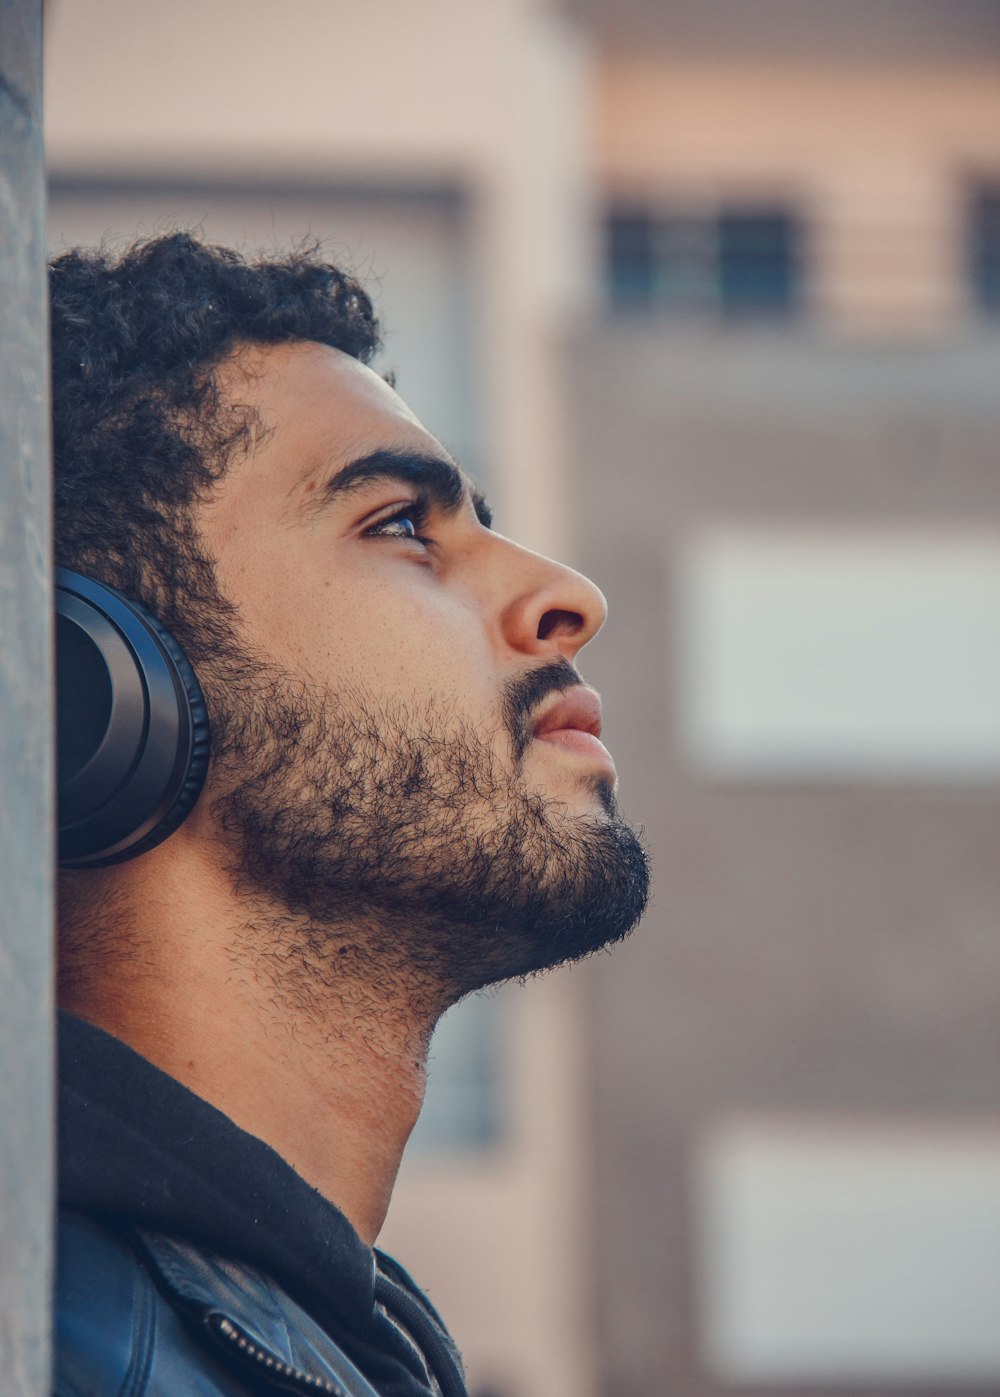 a man wearing headphones leaning against a wall